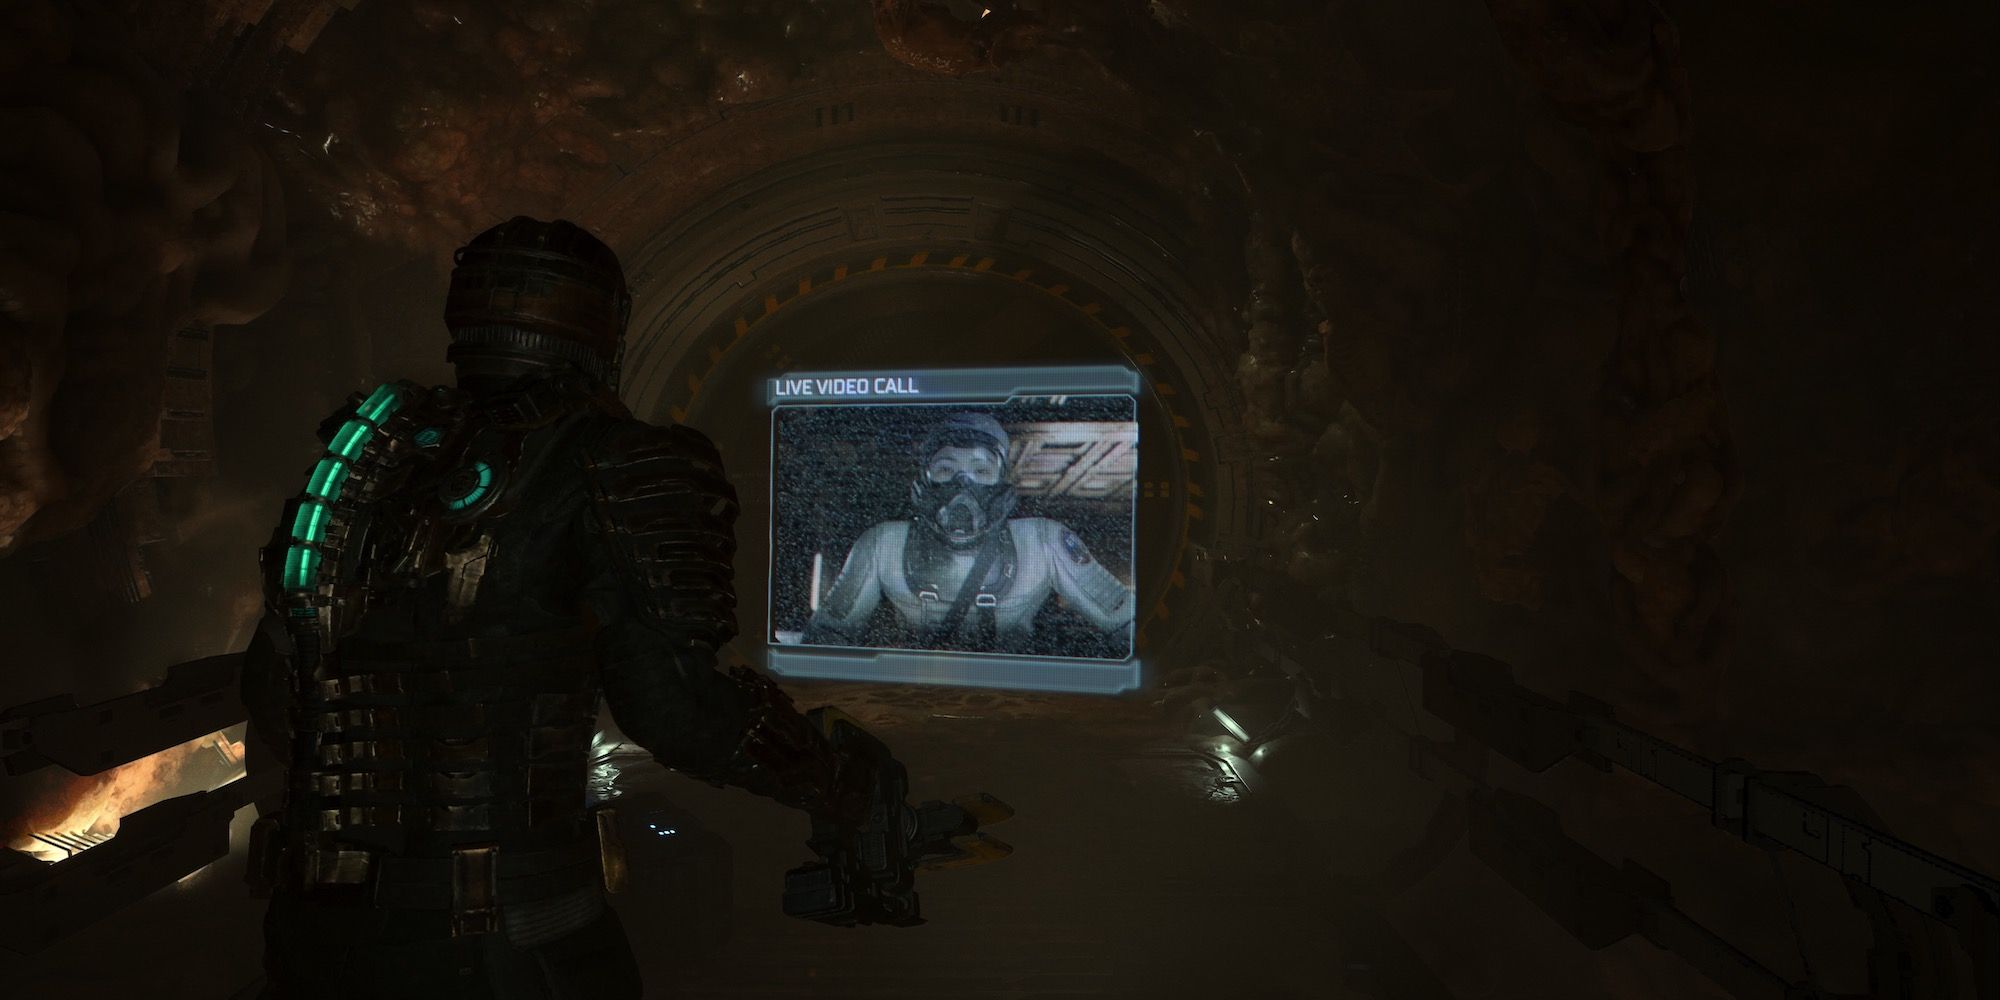 Talking to Cross in the Dead Space remake